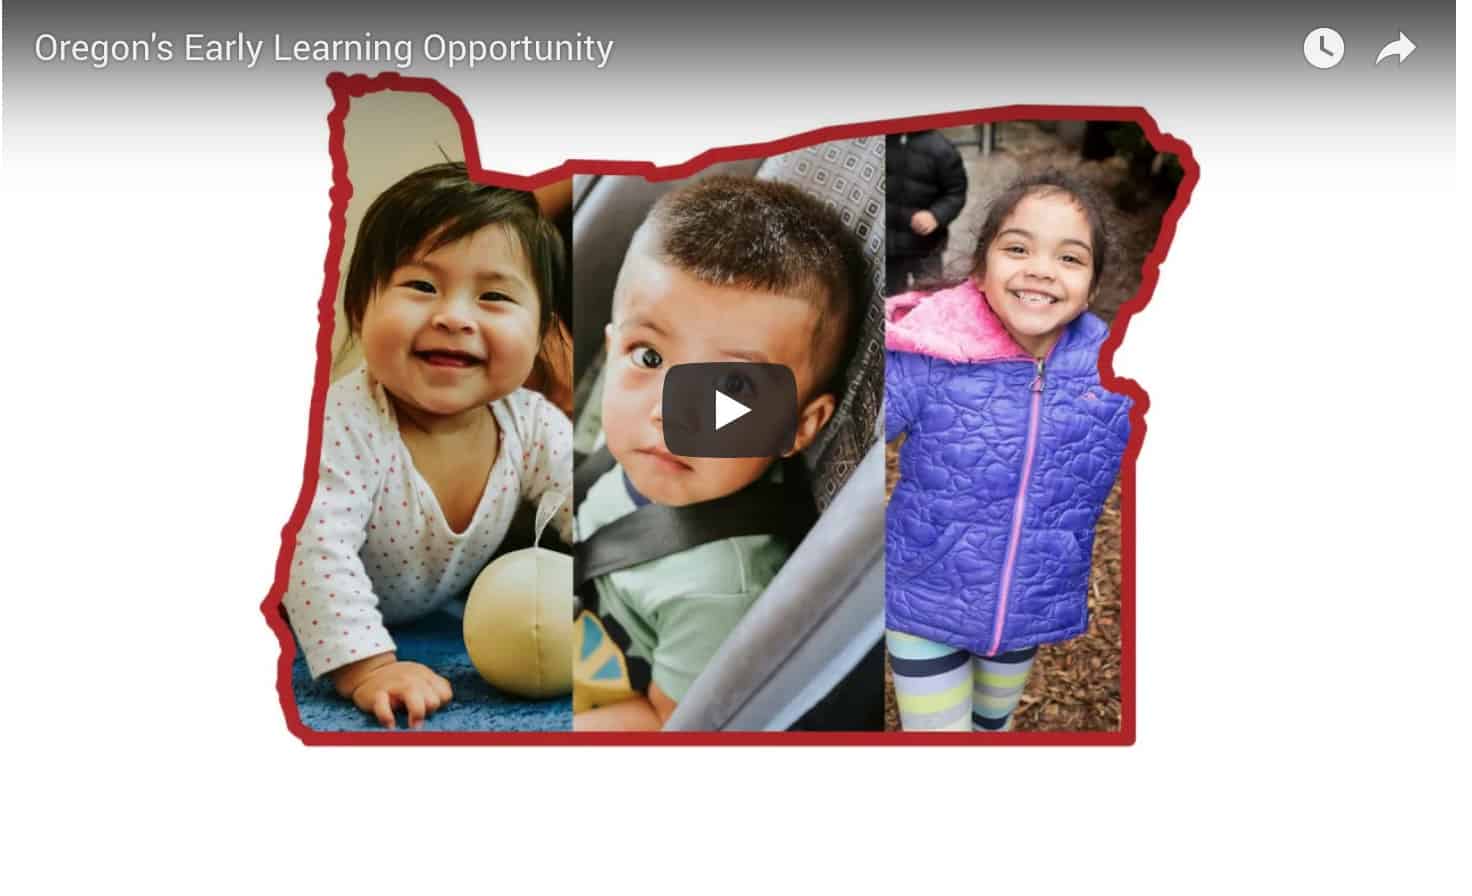 Oregon's Early Learning Opportunity